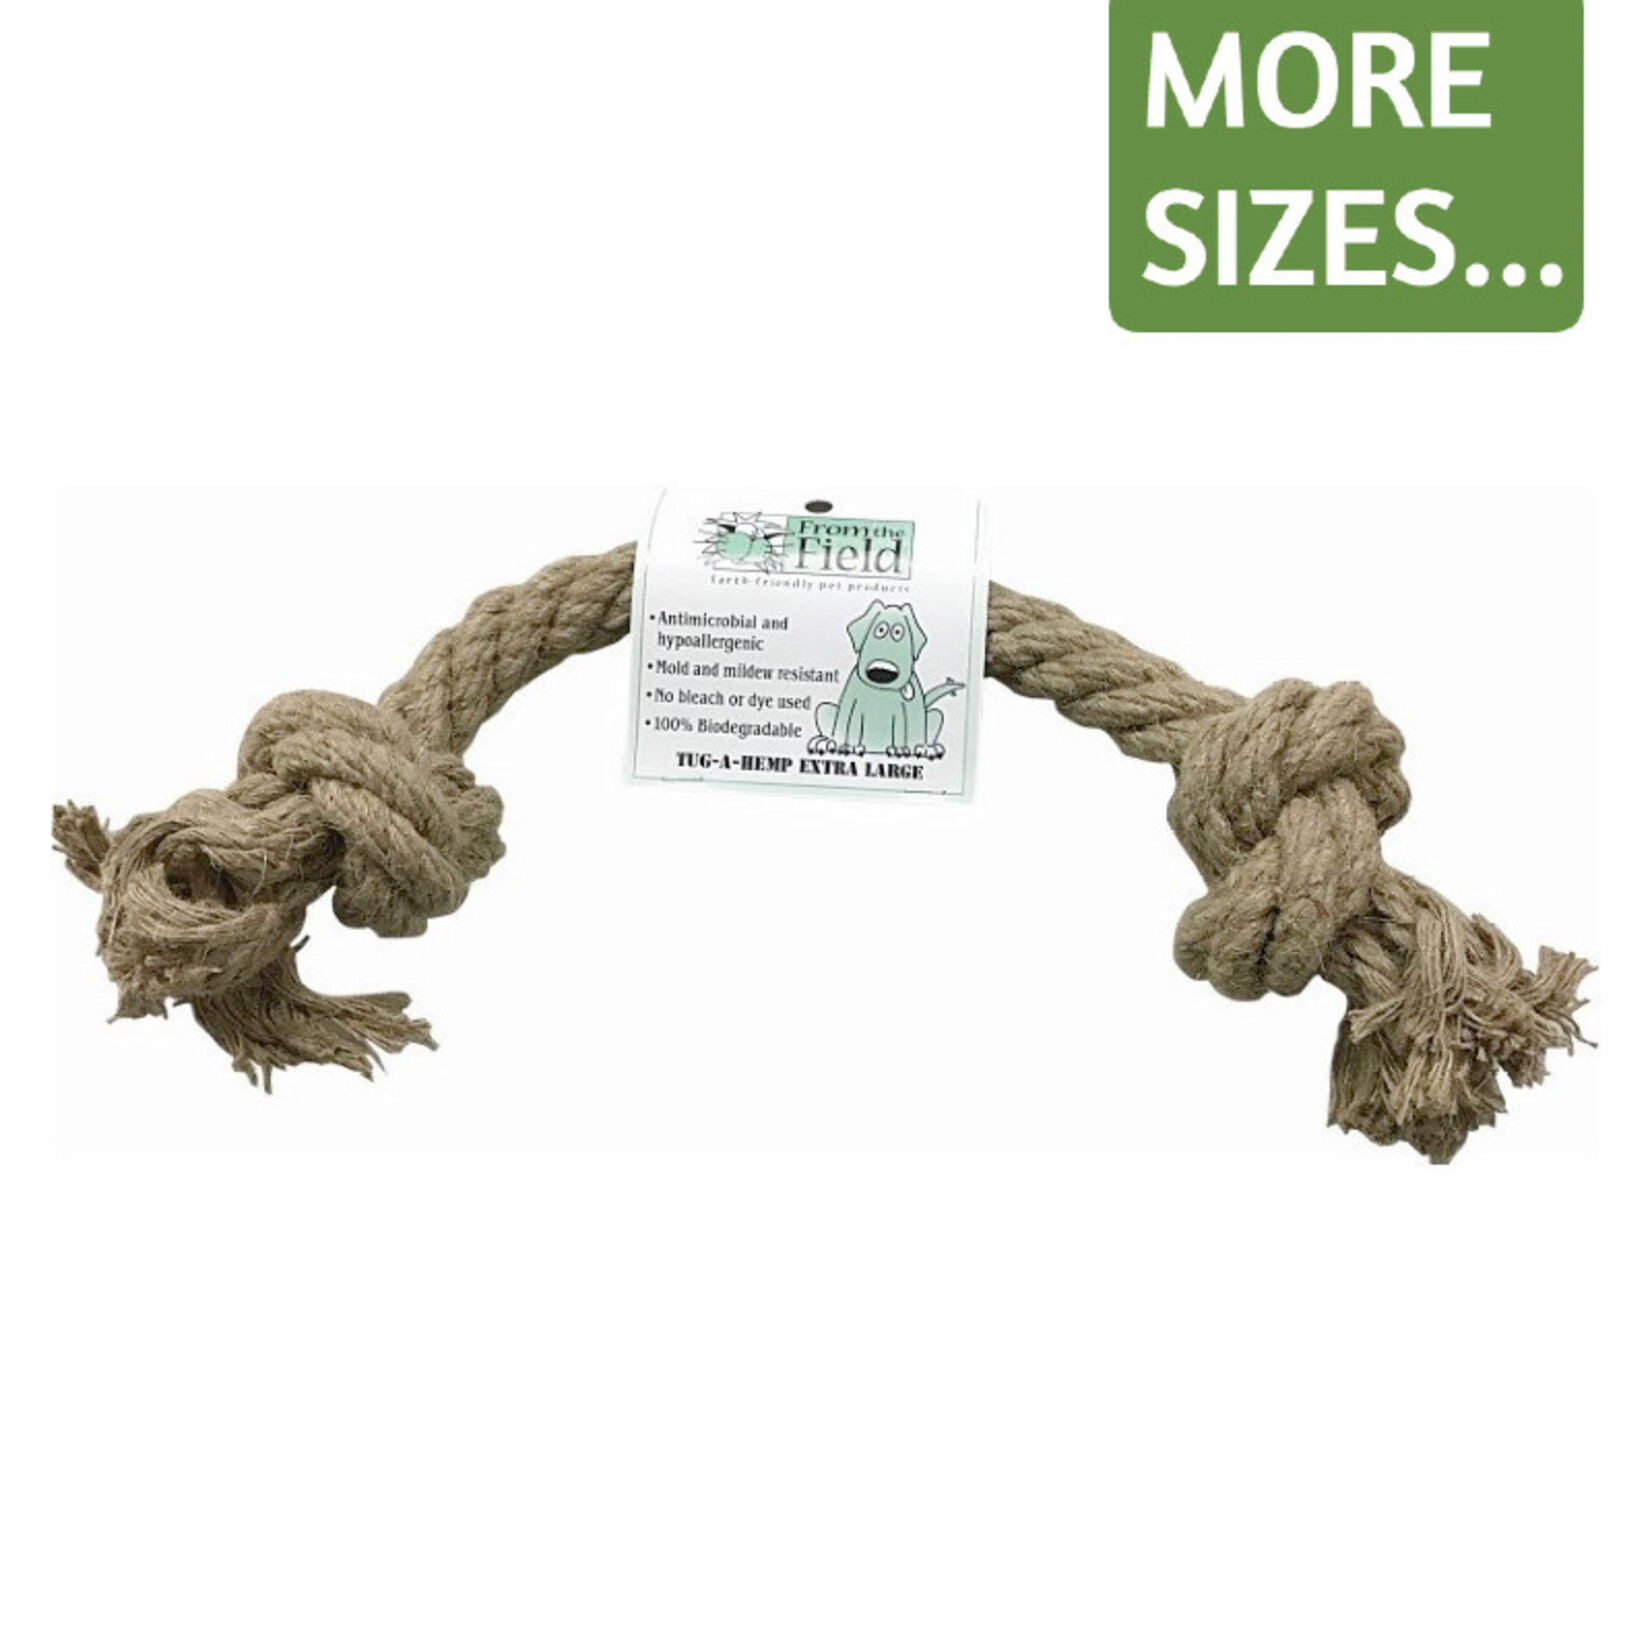 From the Field From the Field Tug-A-Hemp Natural Rope Dog Tug Toy